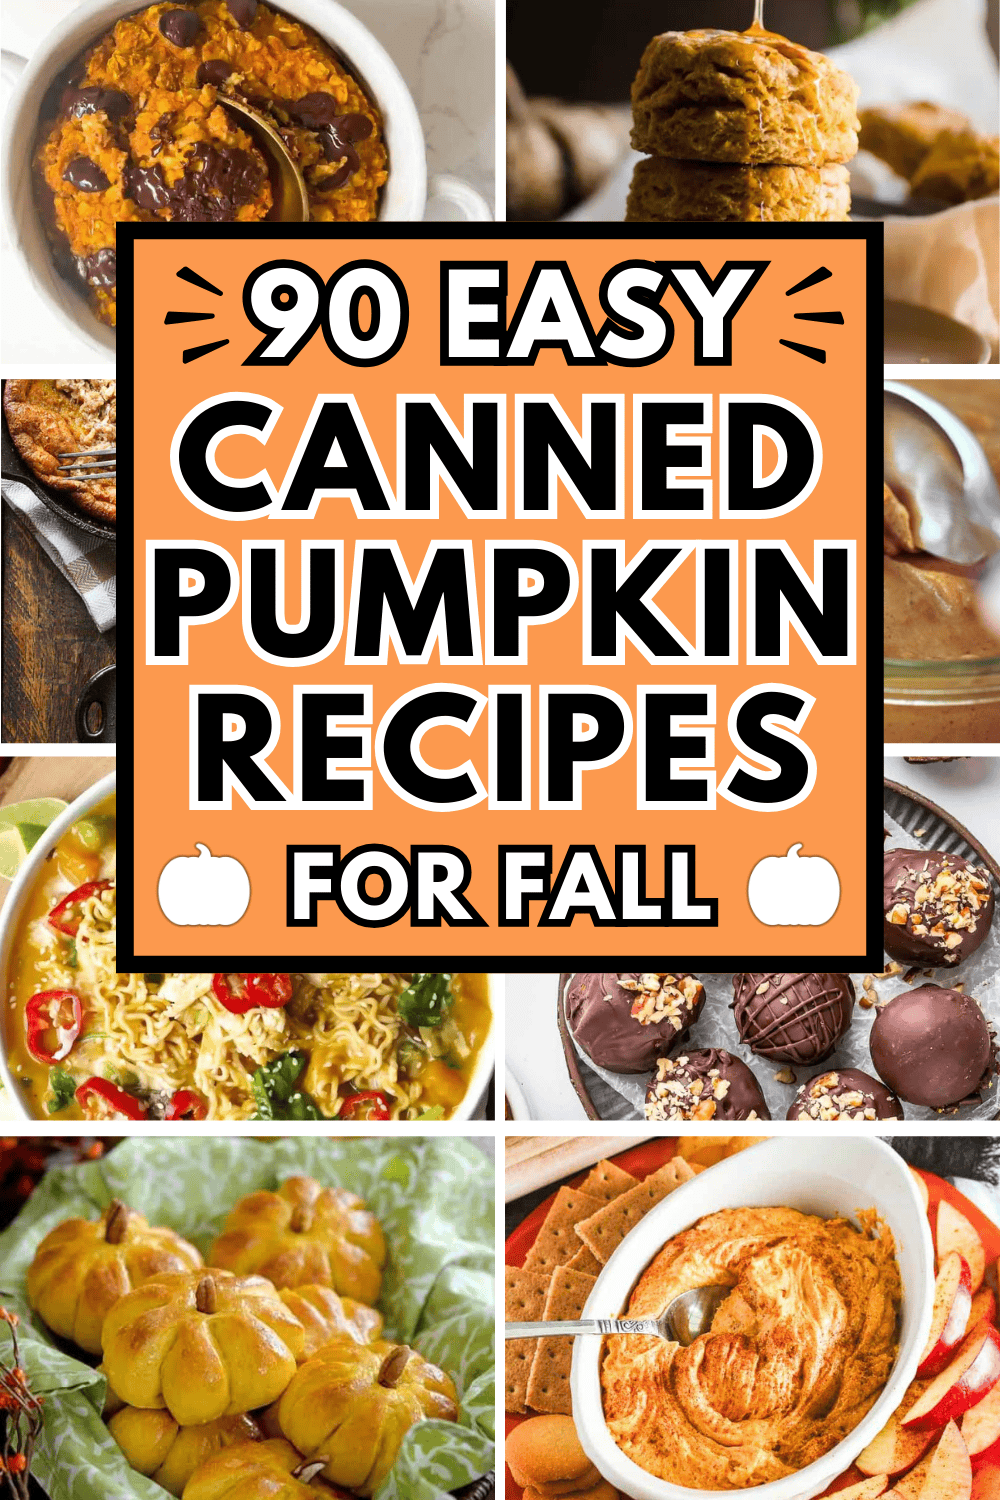 Easy canned pumpkin recipes! Create a delicious breakfast, dinner, dessert or snack with your leftover canned pumpkin. Fall pumpkin recipes for potlucks, Halloween, Thanksgiving, or anytime! Ways to use canned pumpkin, canned pumpkin recipes easy healthy, things to make with canned pumpkin, canned pumpkin recipes desserts, what to do with canned pumpkin, canned pumpkin ideas, pumpkin butter, pumpkin cookies, bread, canned pumpkin puree recipes, savory pumpkin recipes, recipes for canned pumpkin.